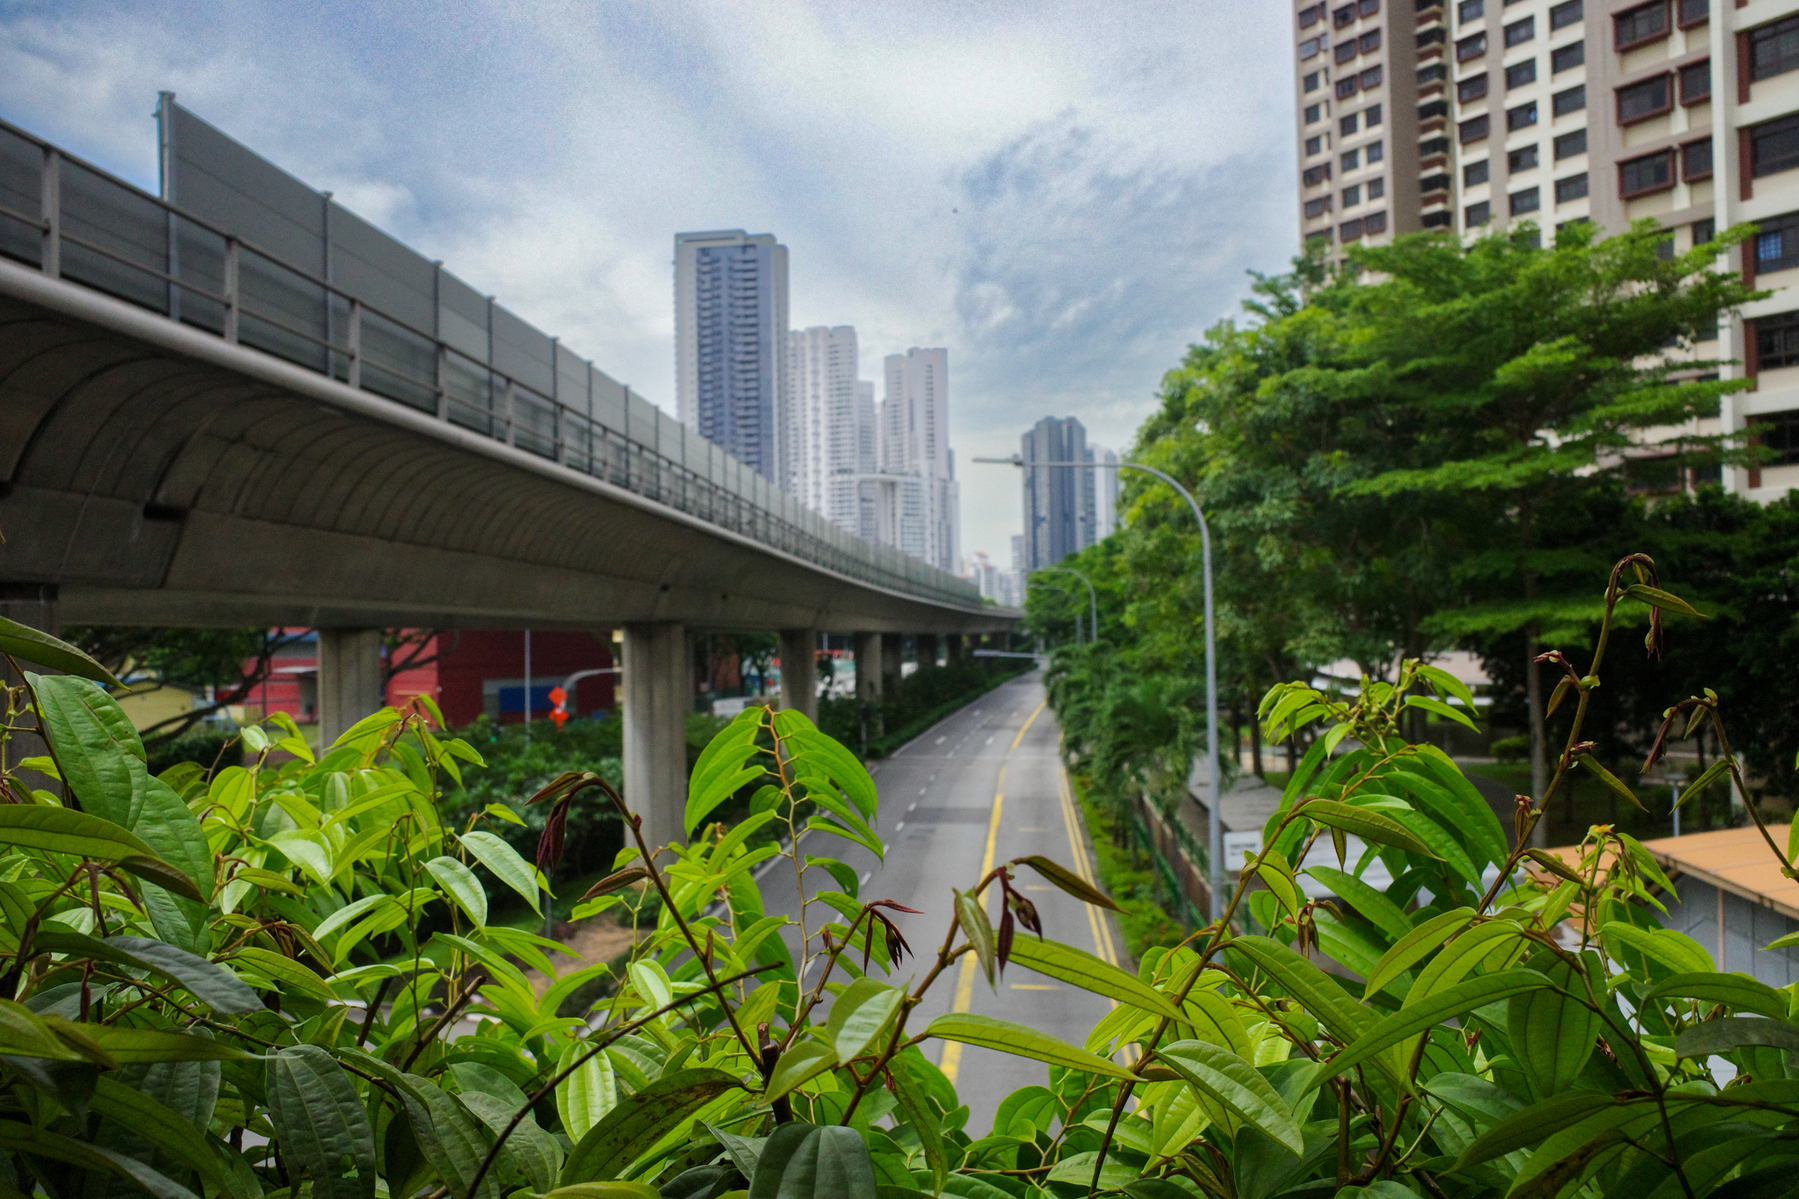 a color photograph of a Singapore subway train station above ground, with tropical plants in the foreground